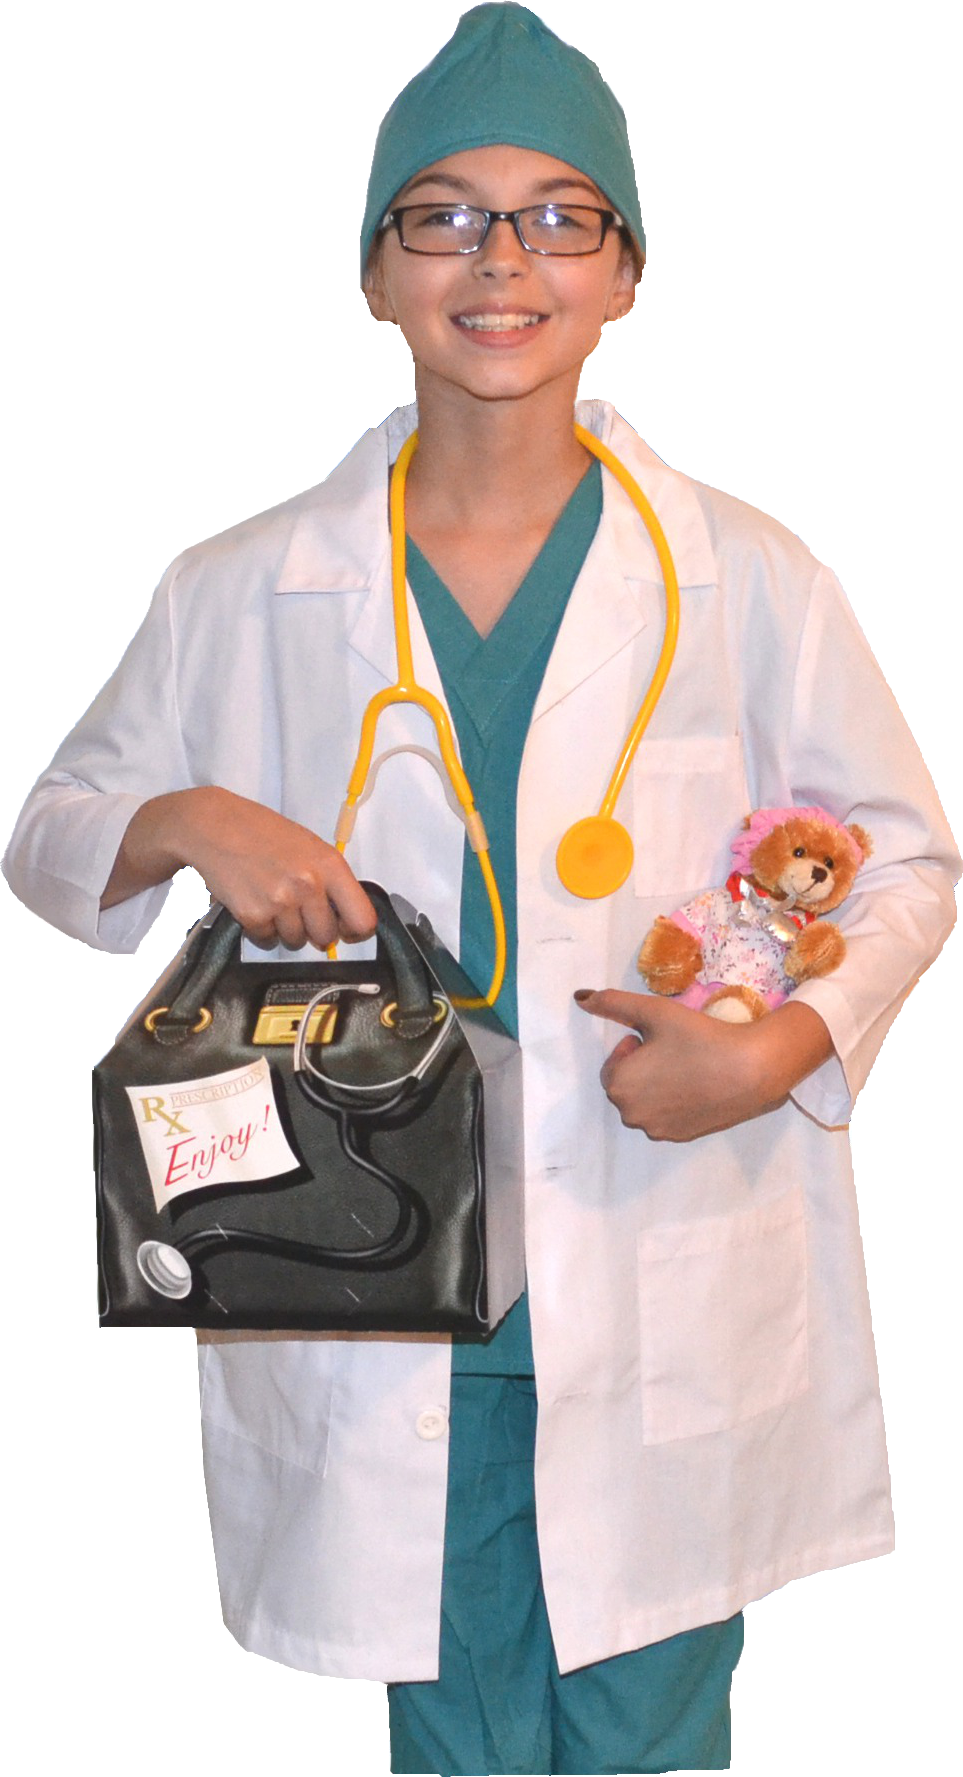 KidsDoctorCostumes.com Introduces Authentic Doctor Costumes for ...